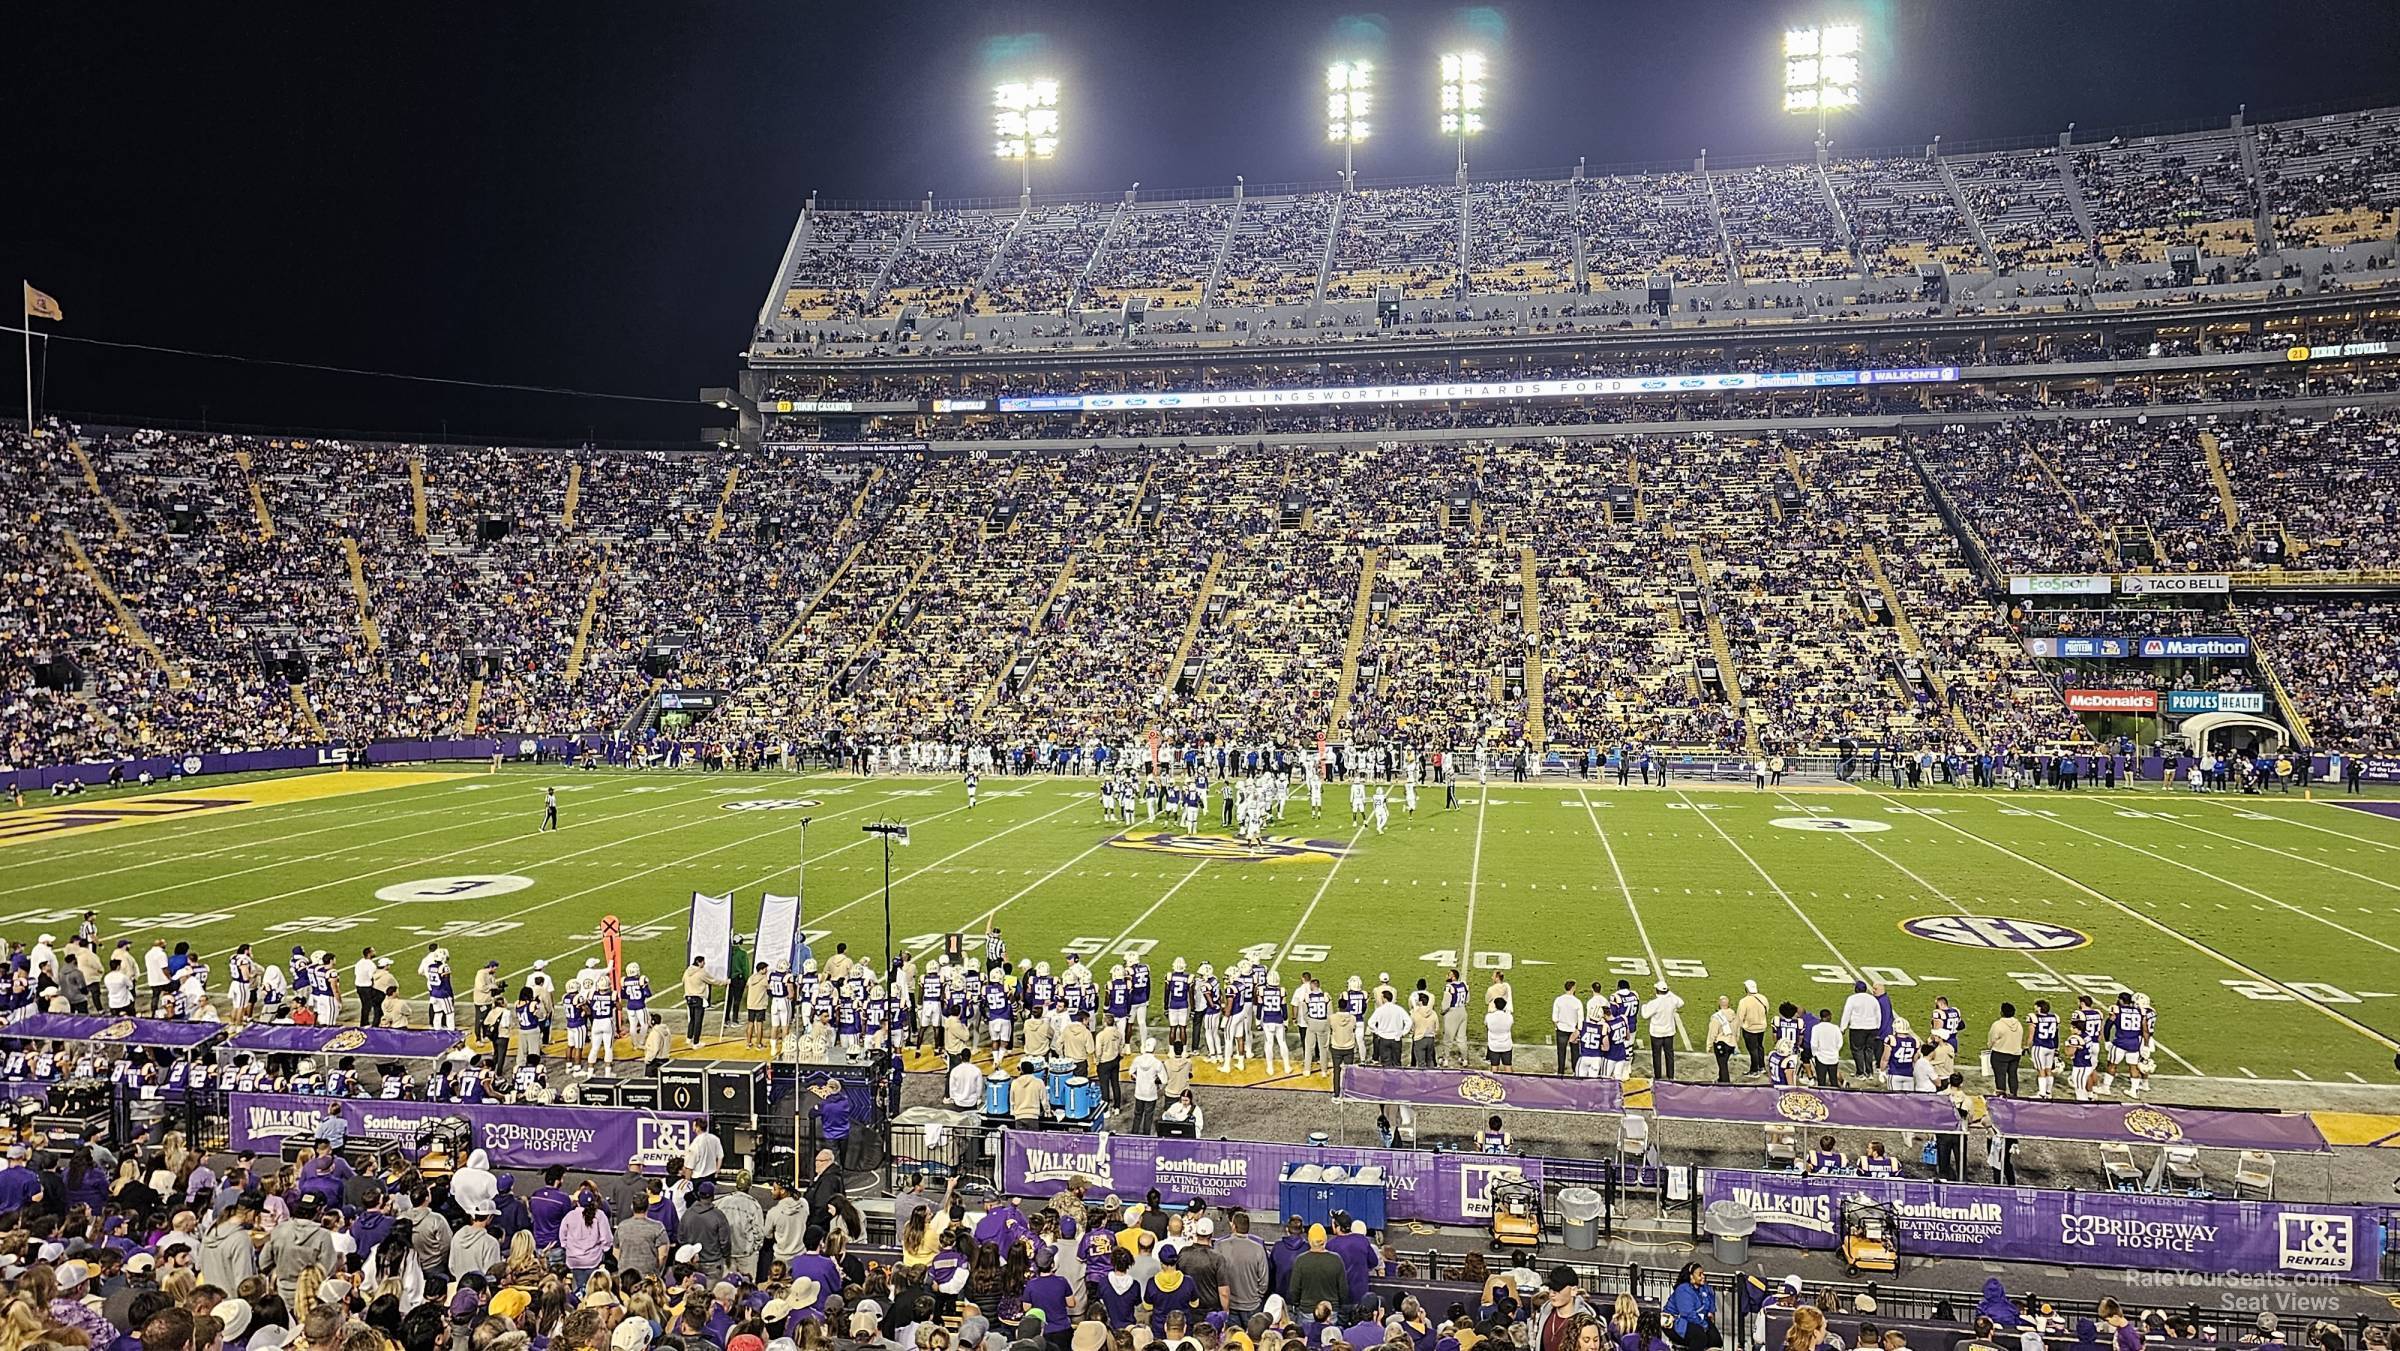 section 103, row 26 seat view  - tiger stadium